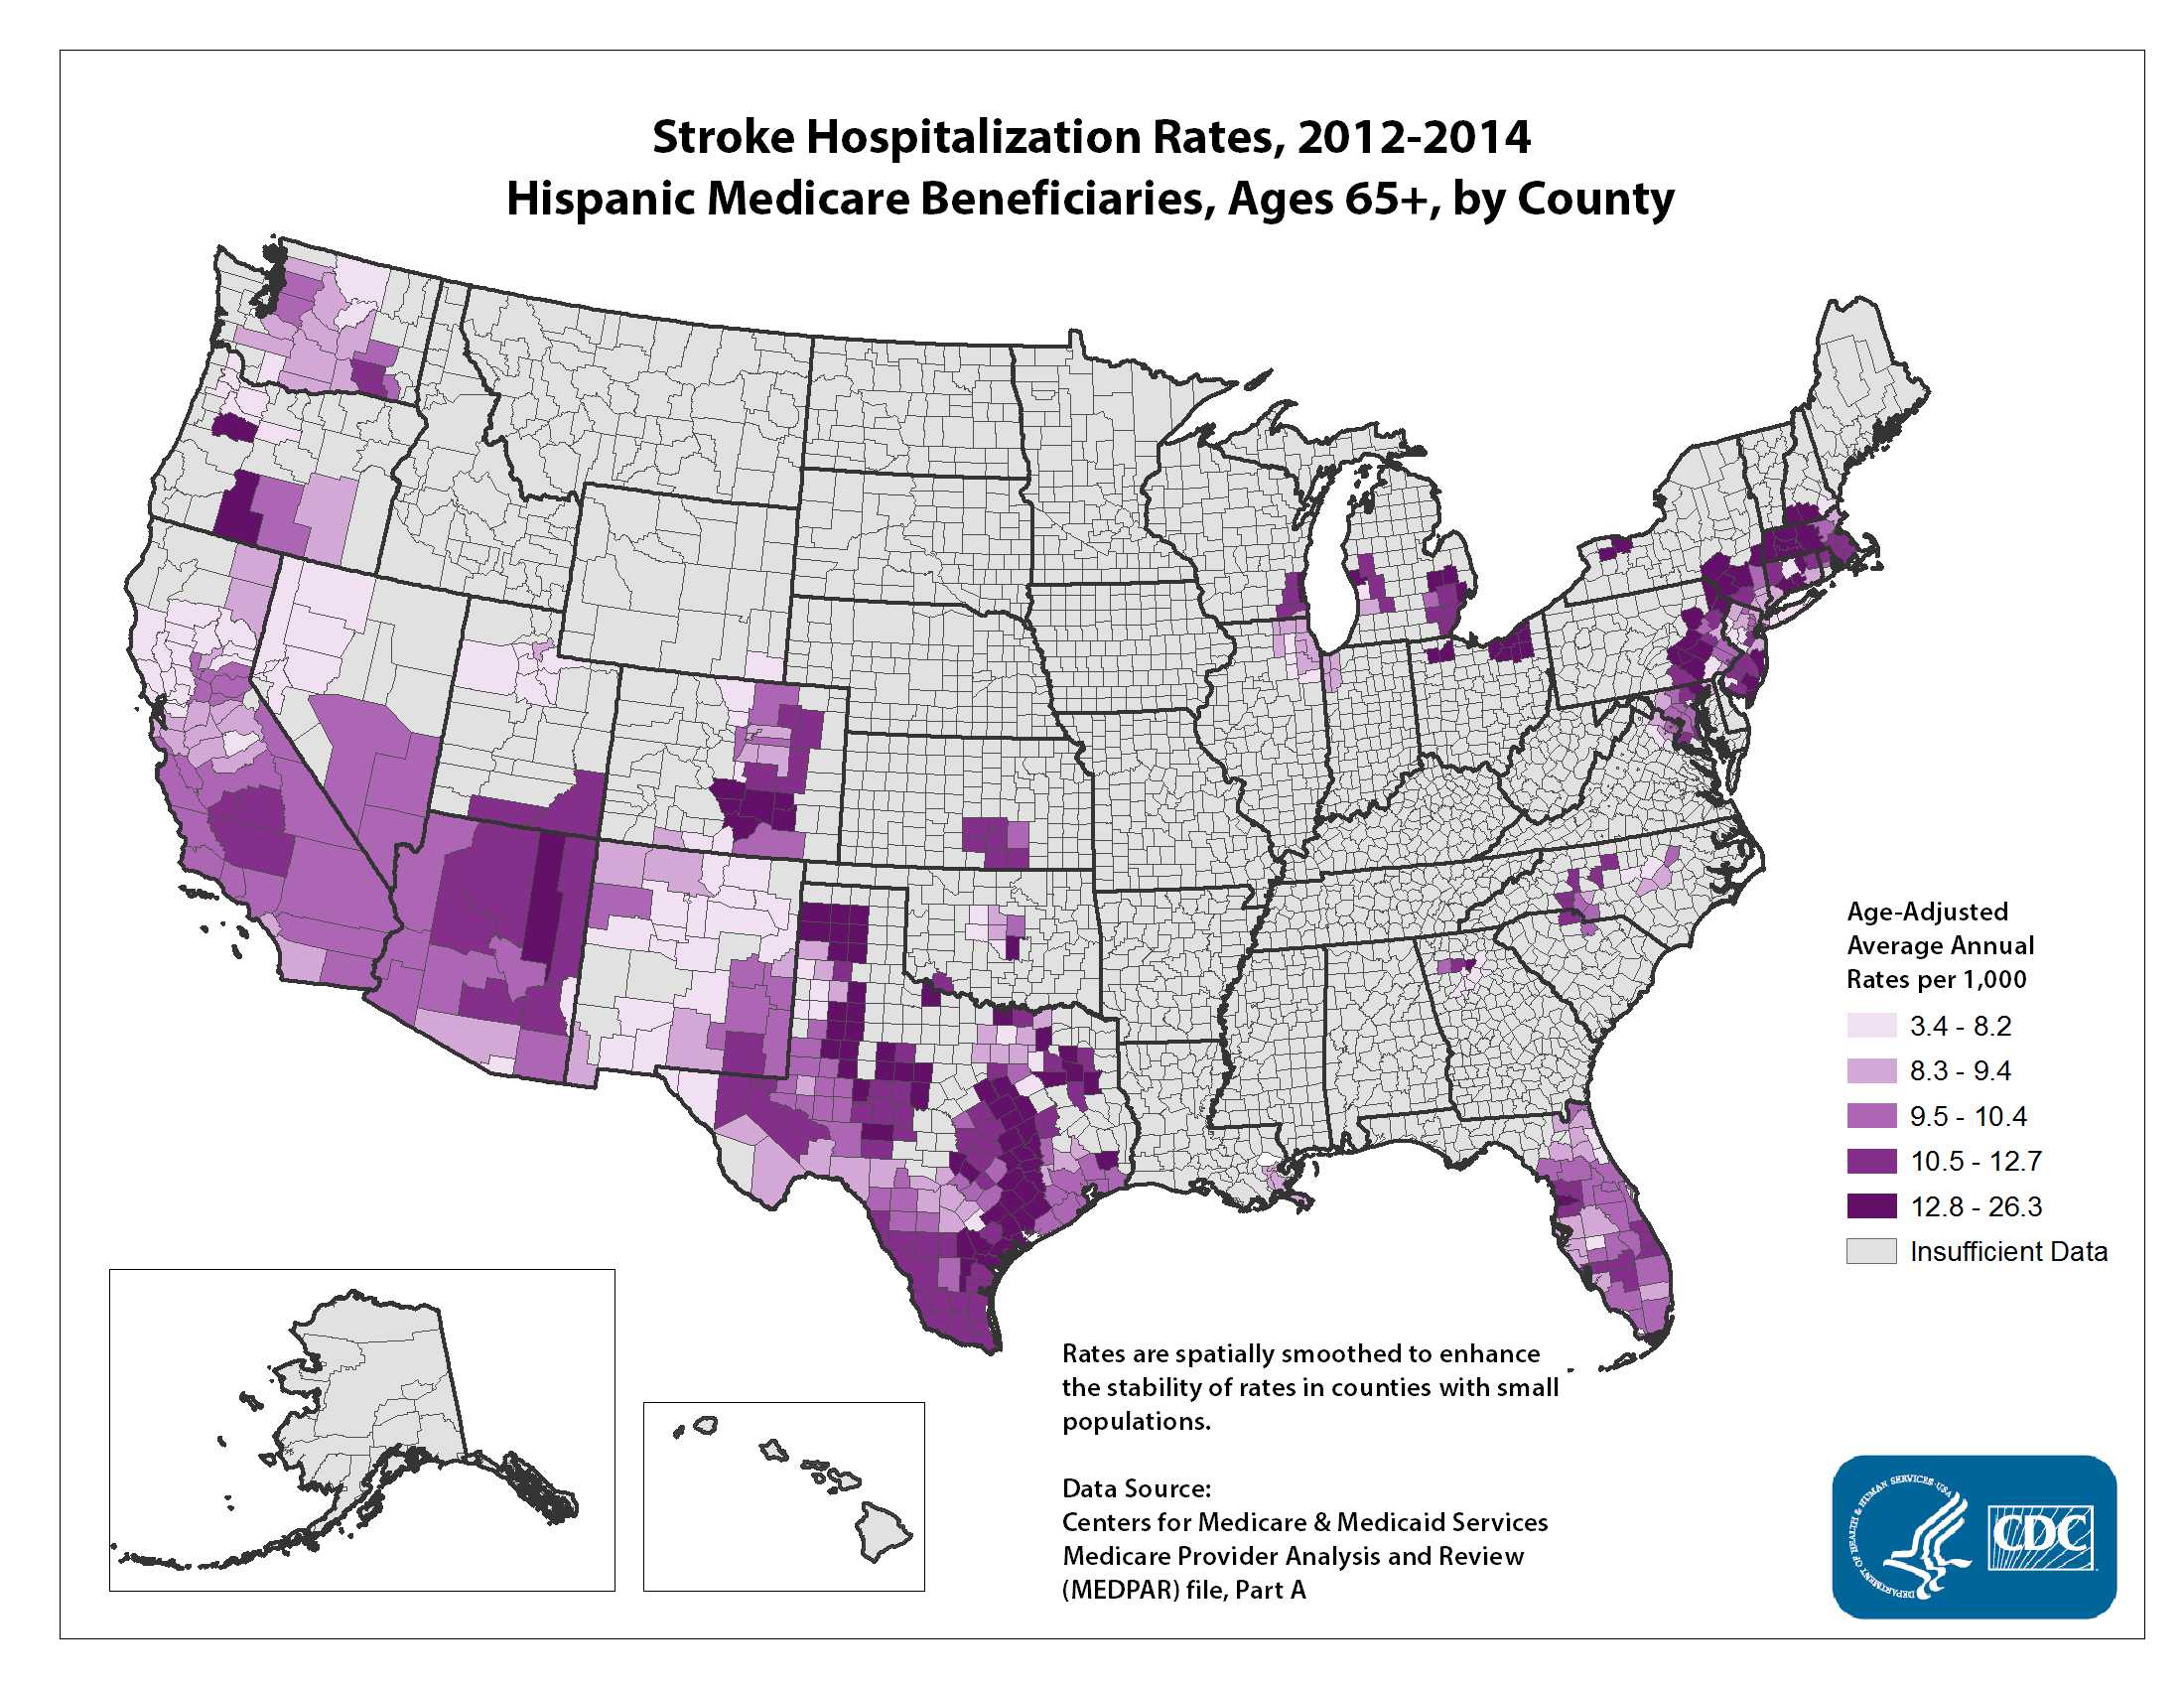 Stroke Hospitalization Rates for 2010 through 2012 for Hispanics Aged 65 Years and Older by County. The map shows that concentrations of counties with the highest stroke hospitalization rates - meaning the top quintile - are located primarily in Texas, Massachusetts, and New York.